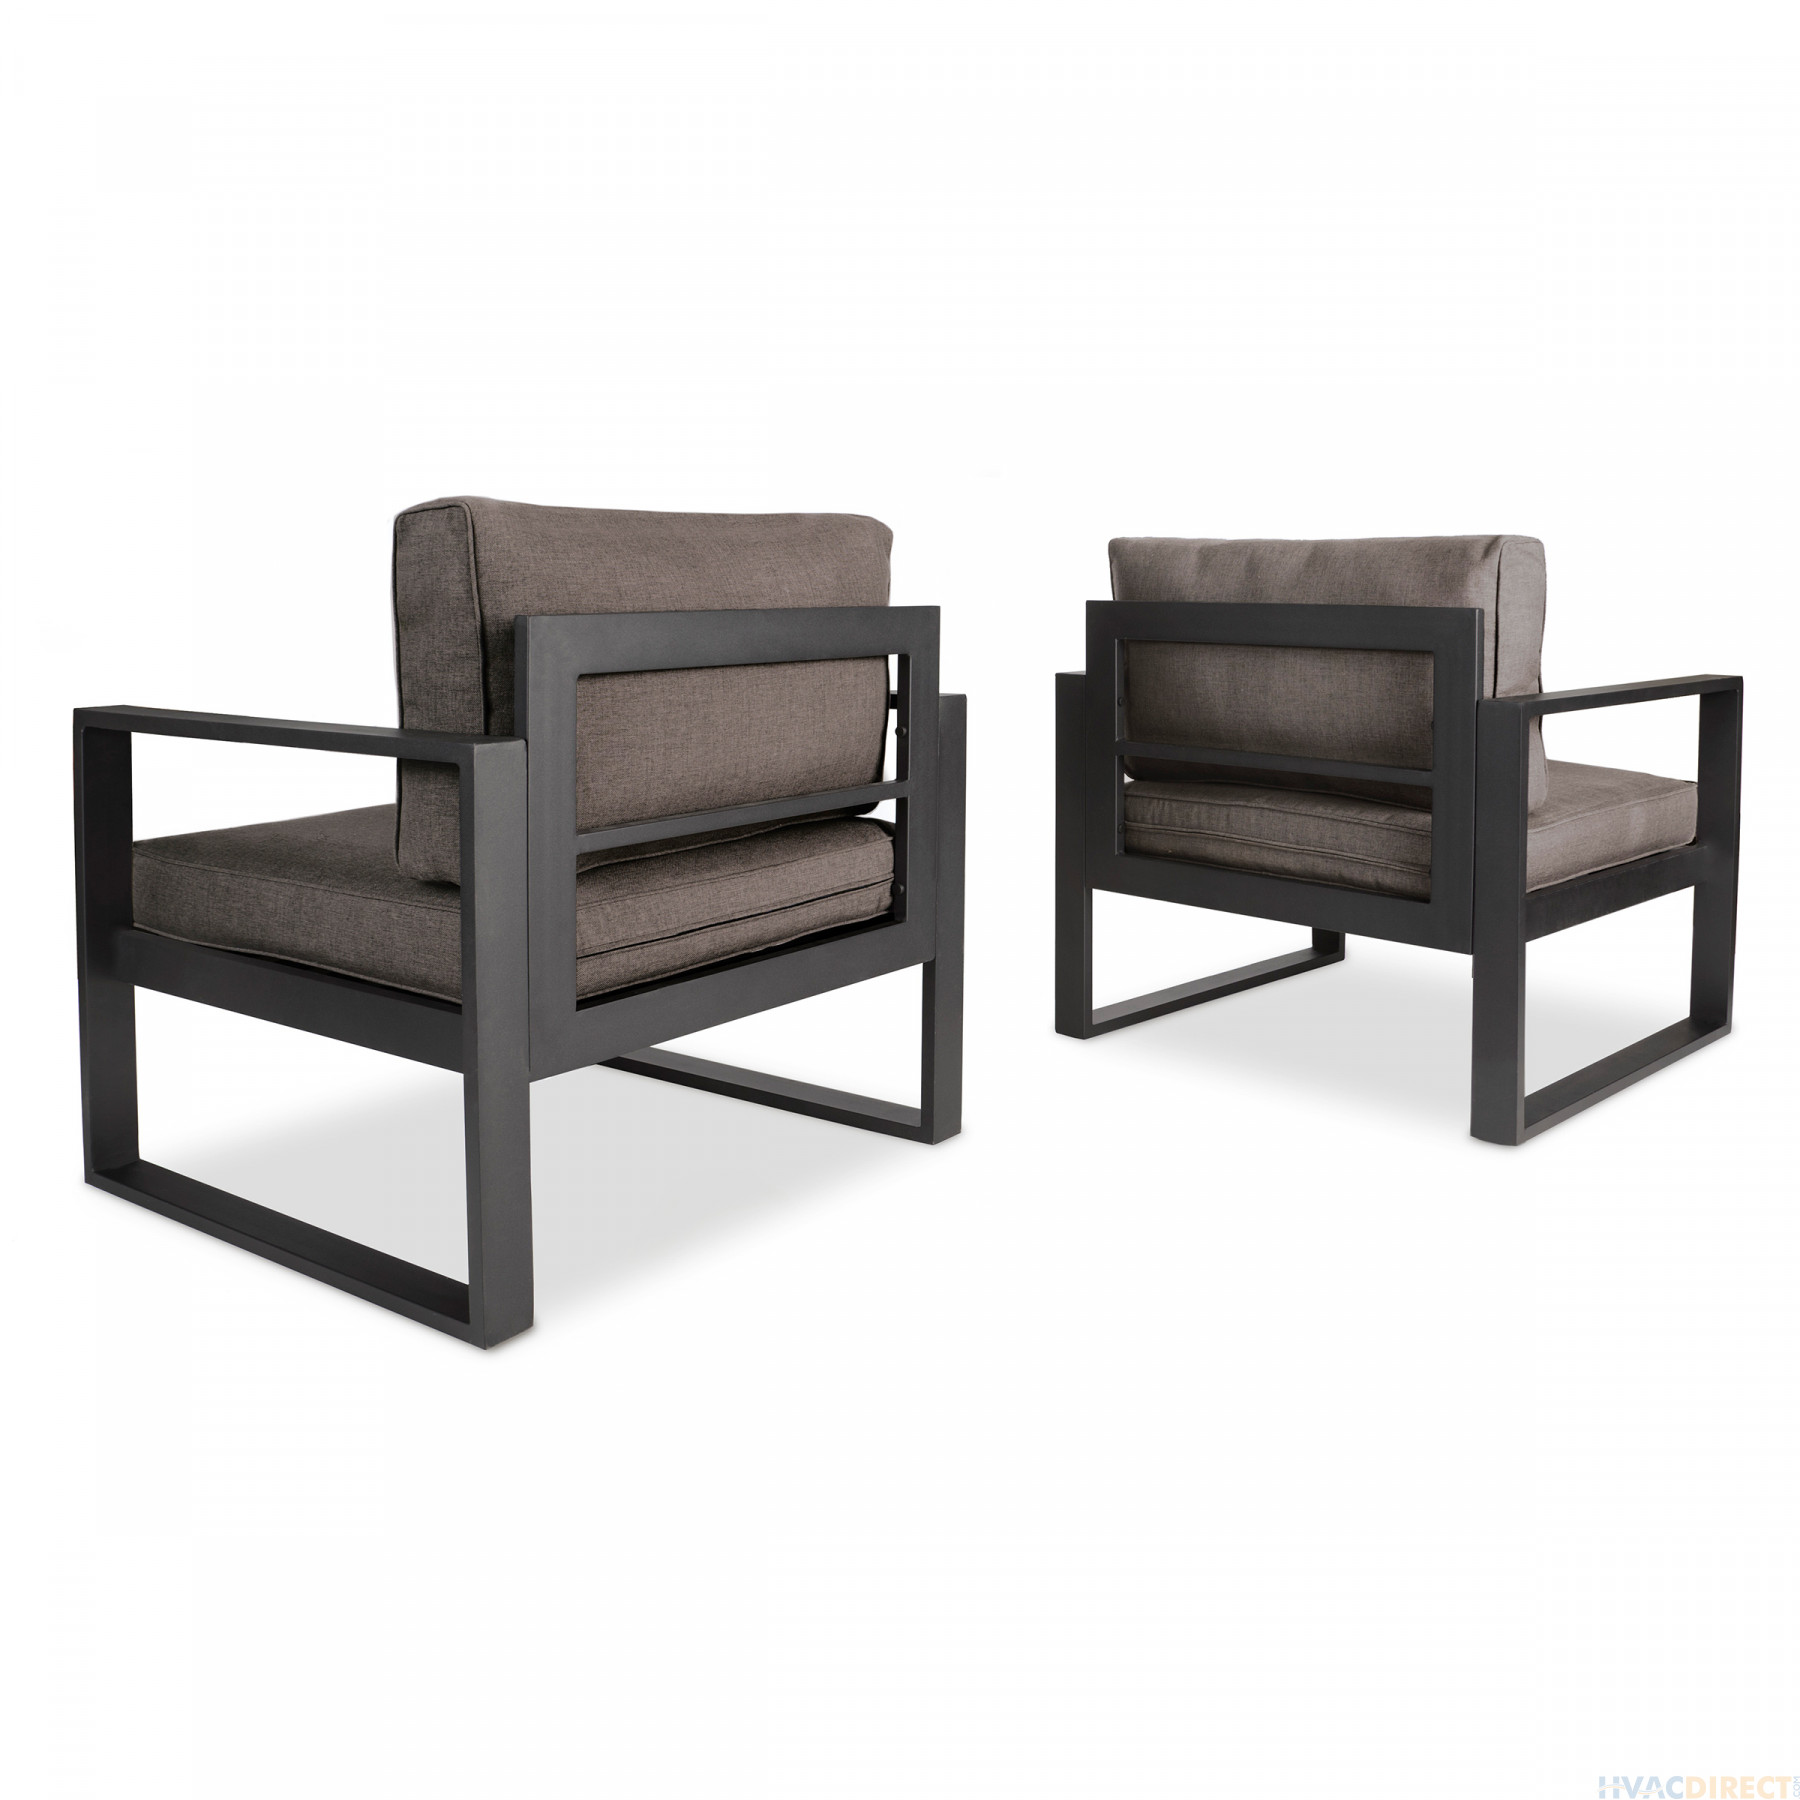 Real Flame Baltic Chair Set (2 Chairs) - Black - 9611-BK